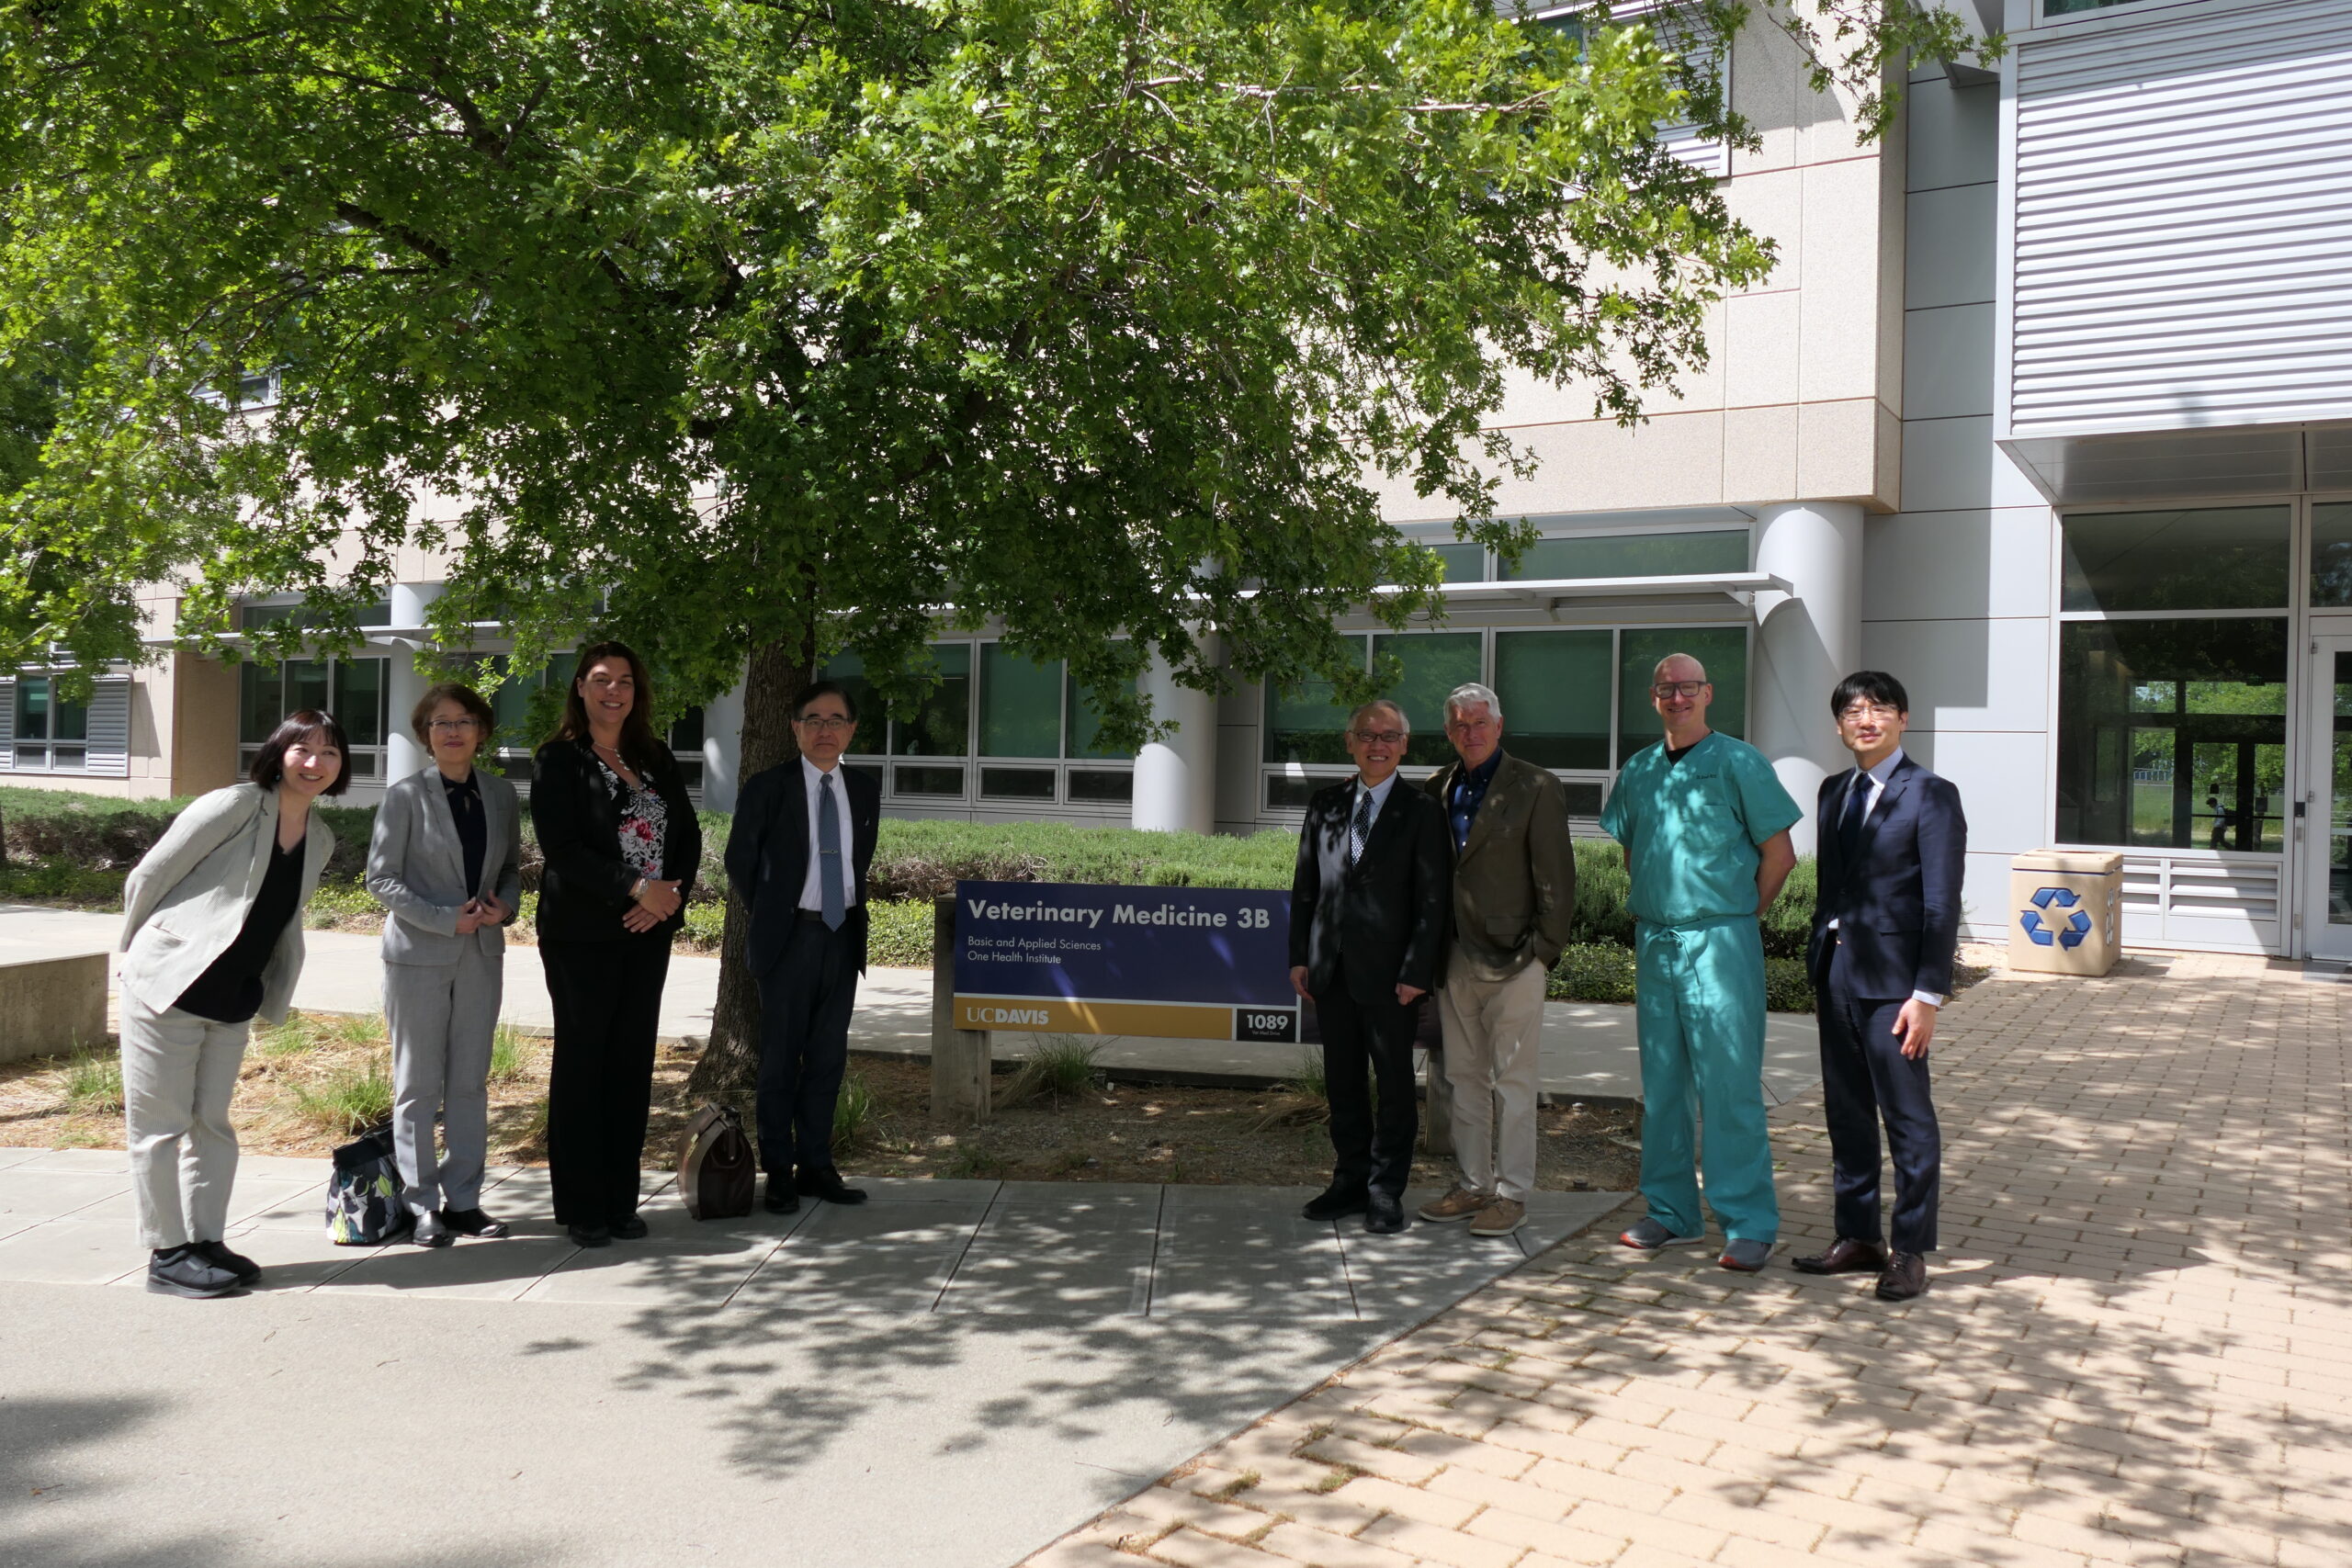 Eight people are standing in front of the Veterinary Medicine school sign.